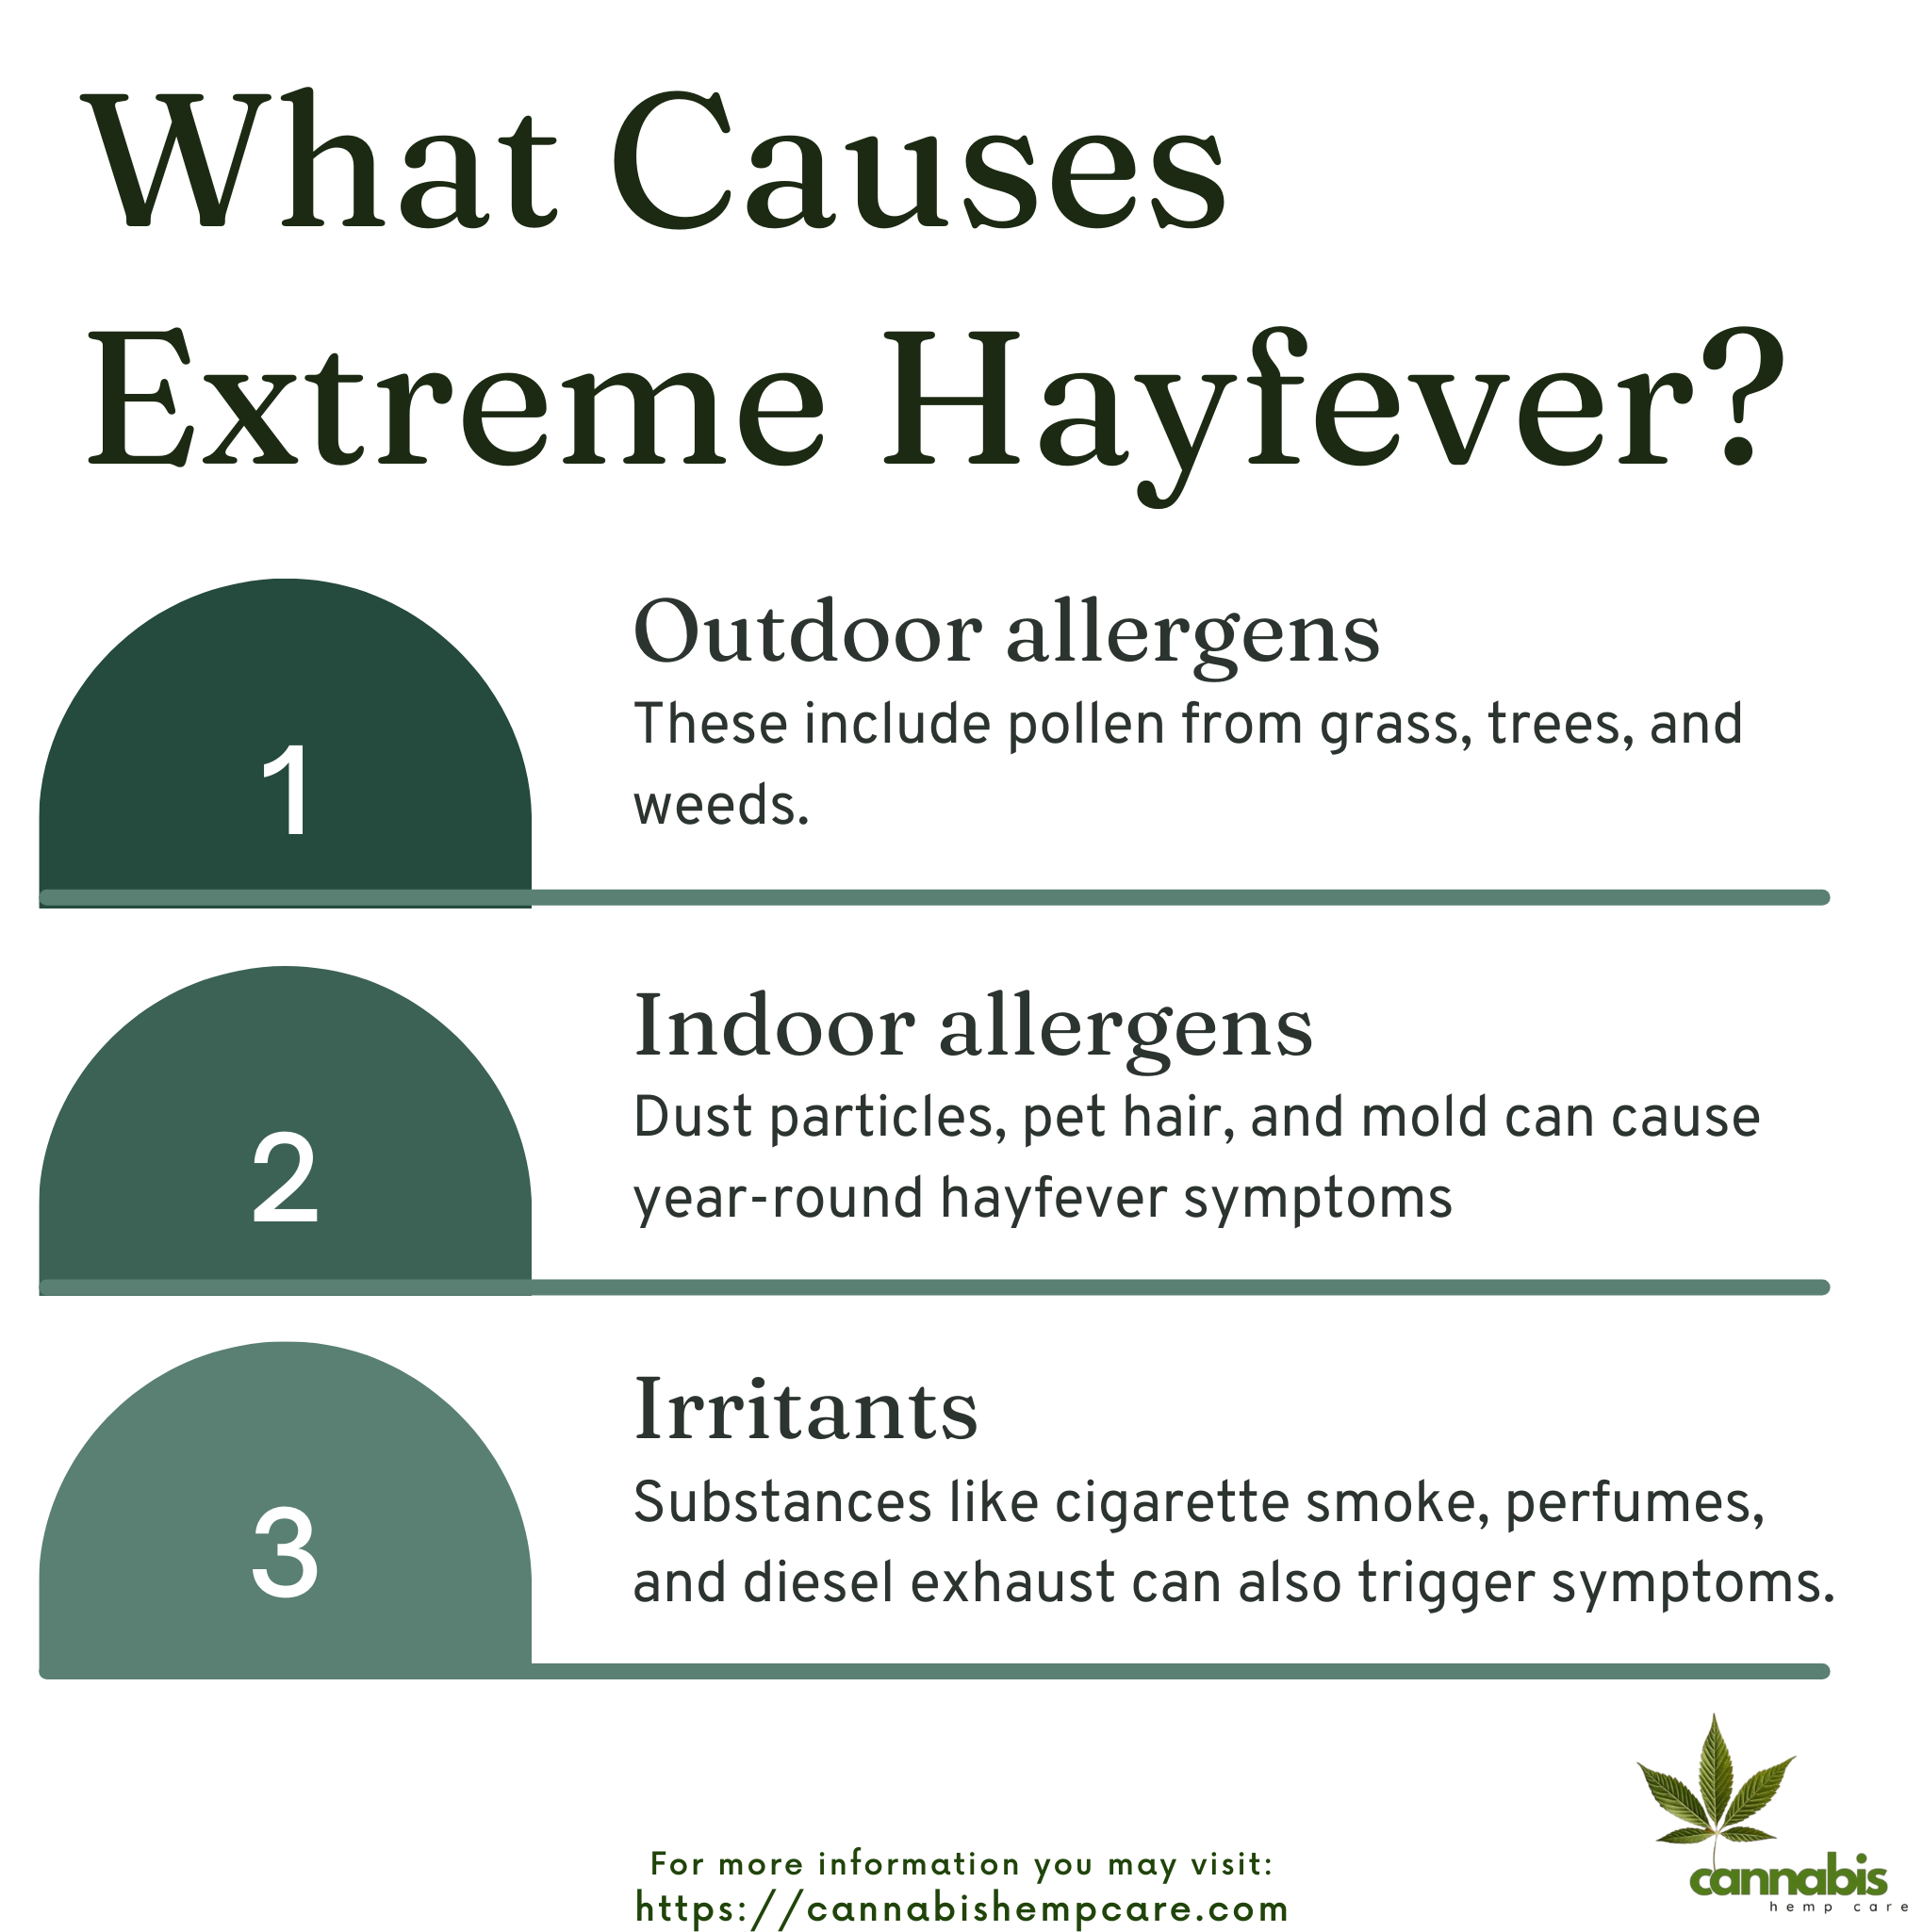 What Causes Extreme Hayfever?